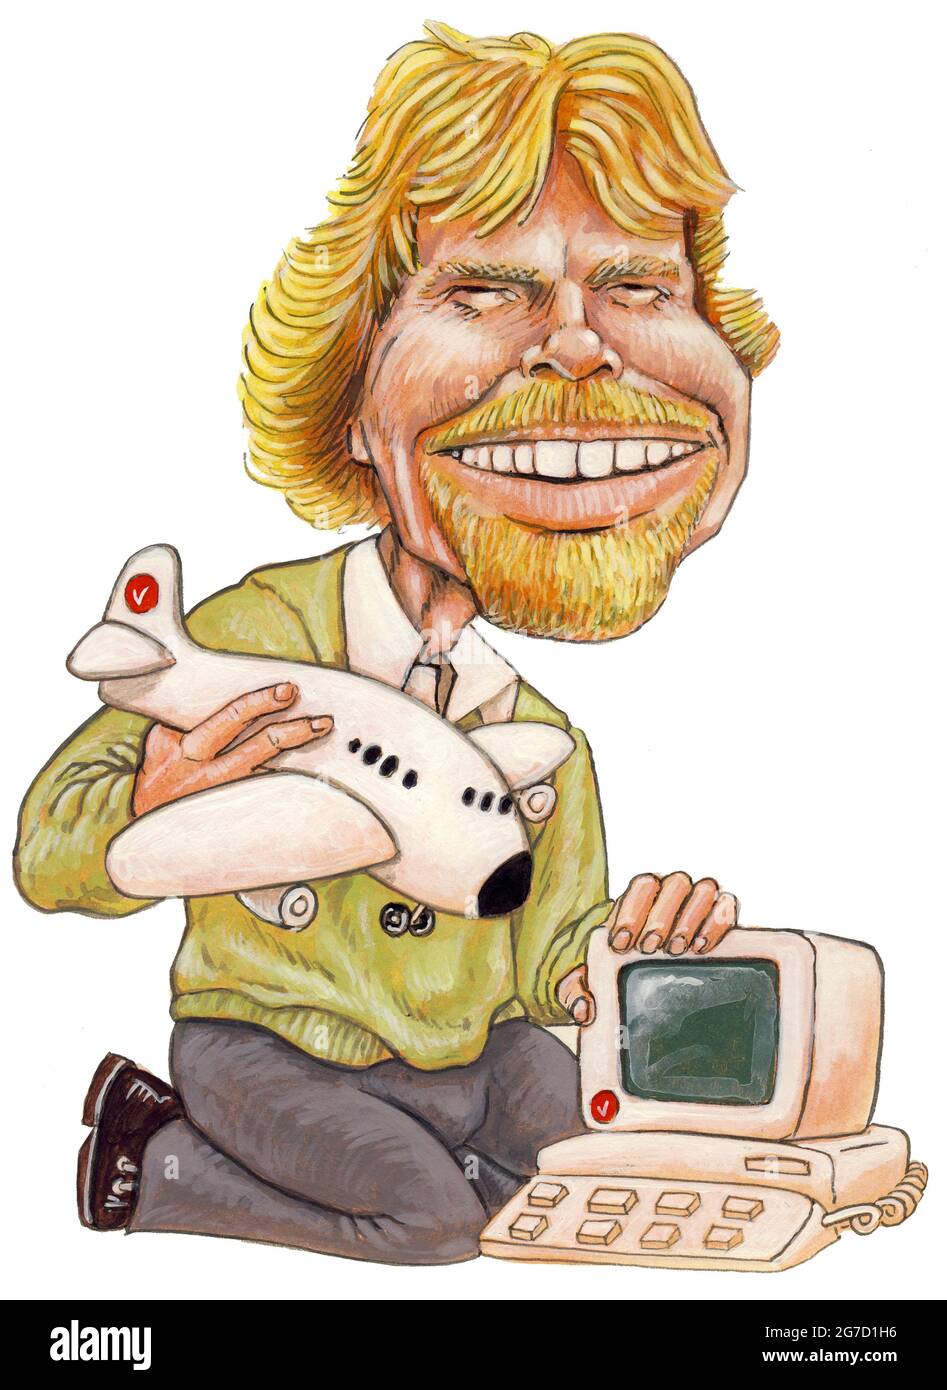 Caricature illustration of entrepreneur & billionaire Richard Branson, founder of Virgin. The Cartoon references his early games & airline businesses, Stock Photo